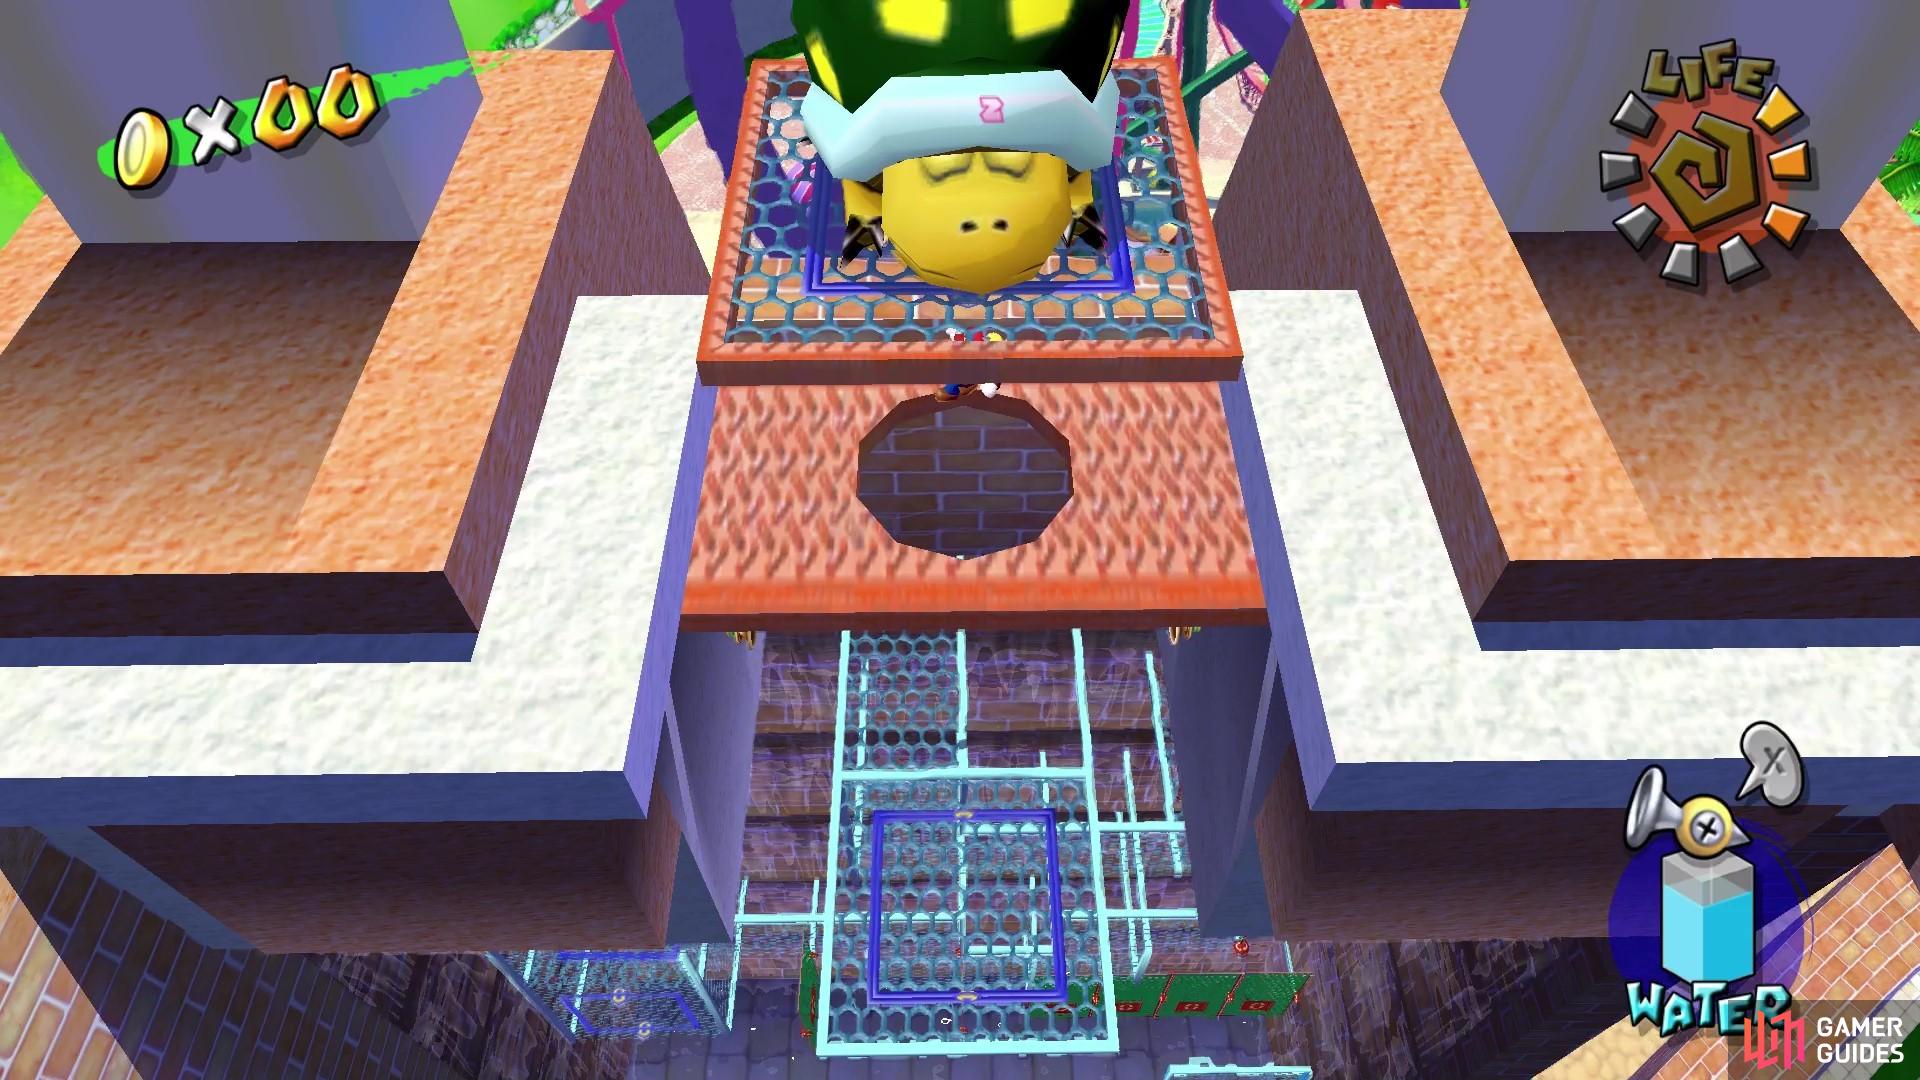 Jump up and launch the Koopa off the Ferris Wheel!